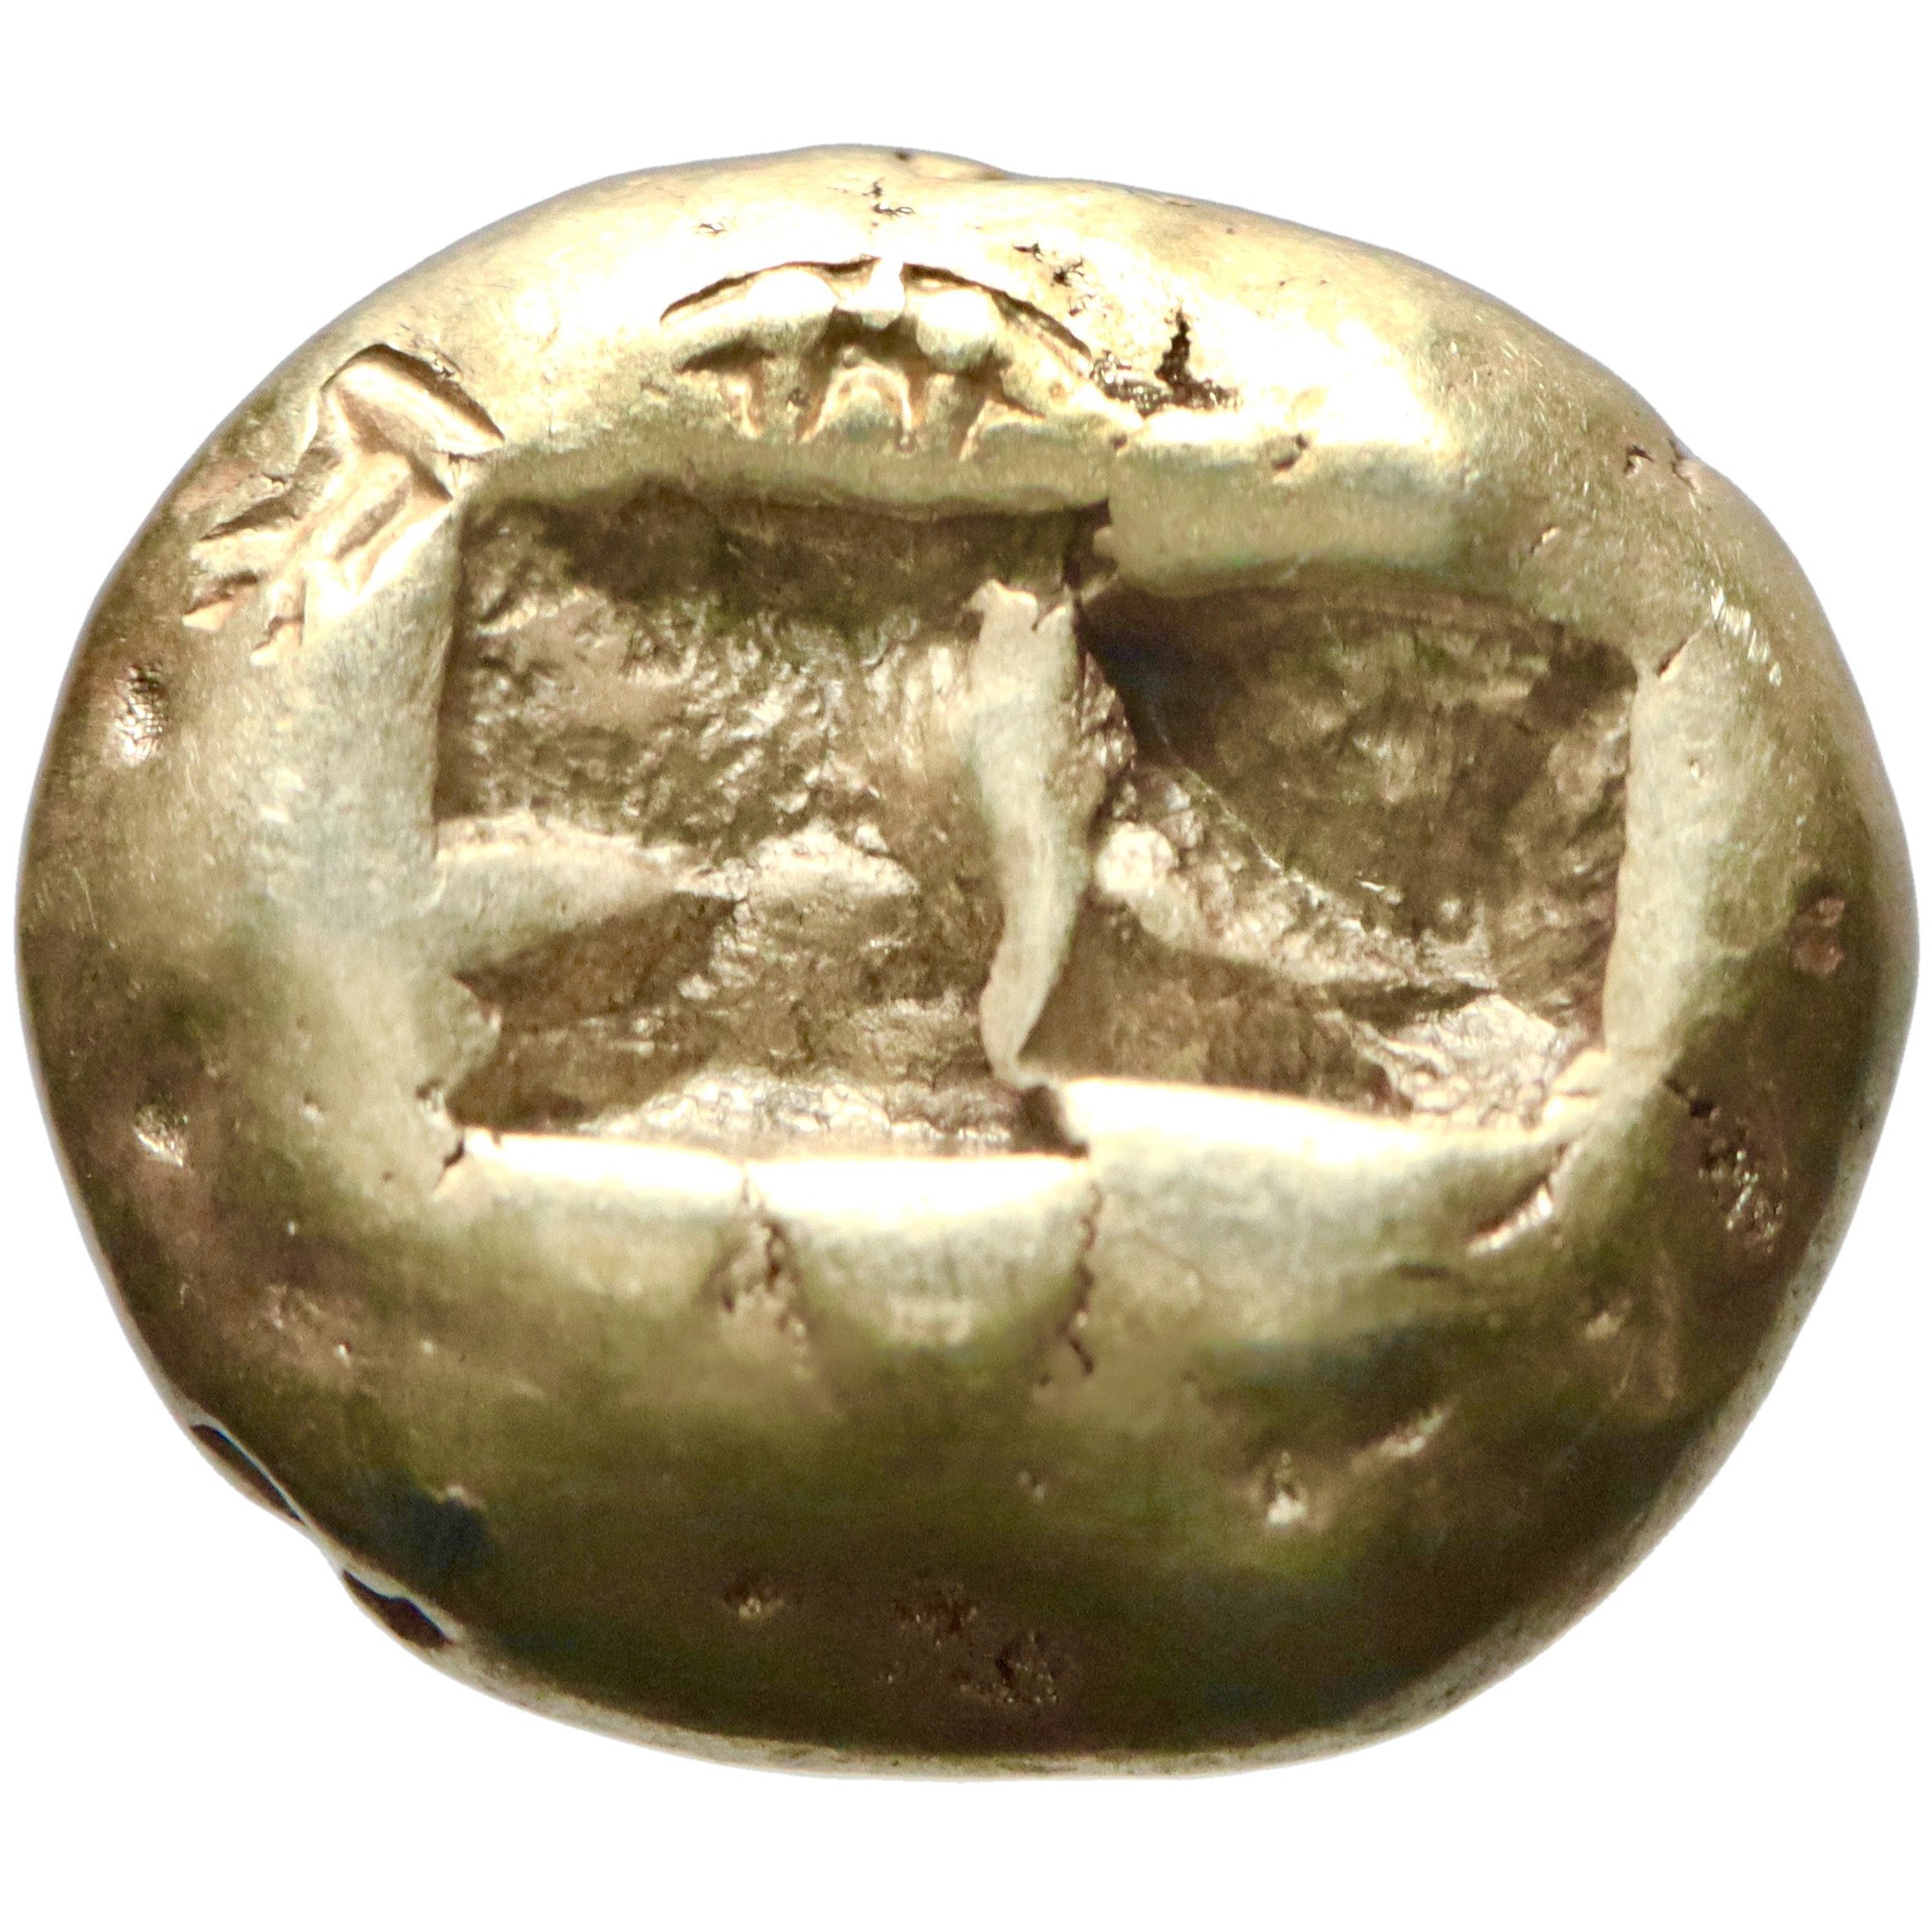 Kingdom of Lydia, Alyattes to Kroisos, gold/electrum trite (1/3 stater), Sardes mint, 610-546 BCE, head of lion right; sun and rays above / two incuse squares, Birth of Coinage series